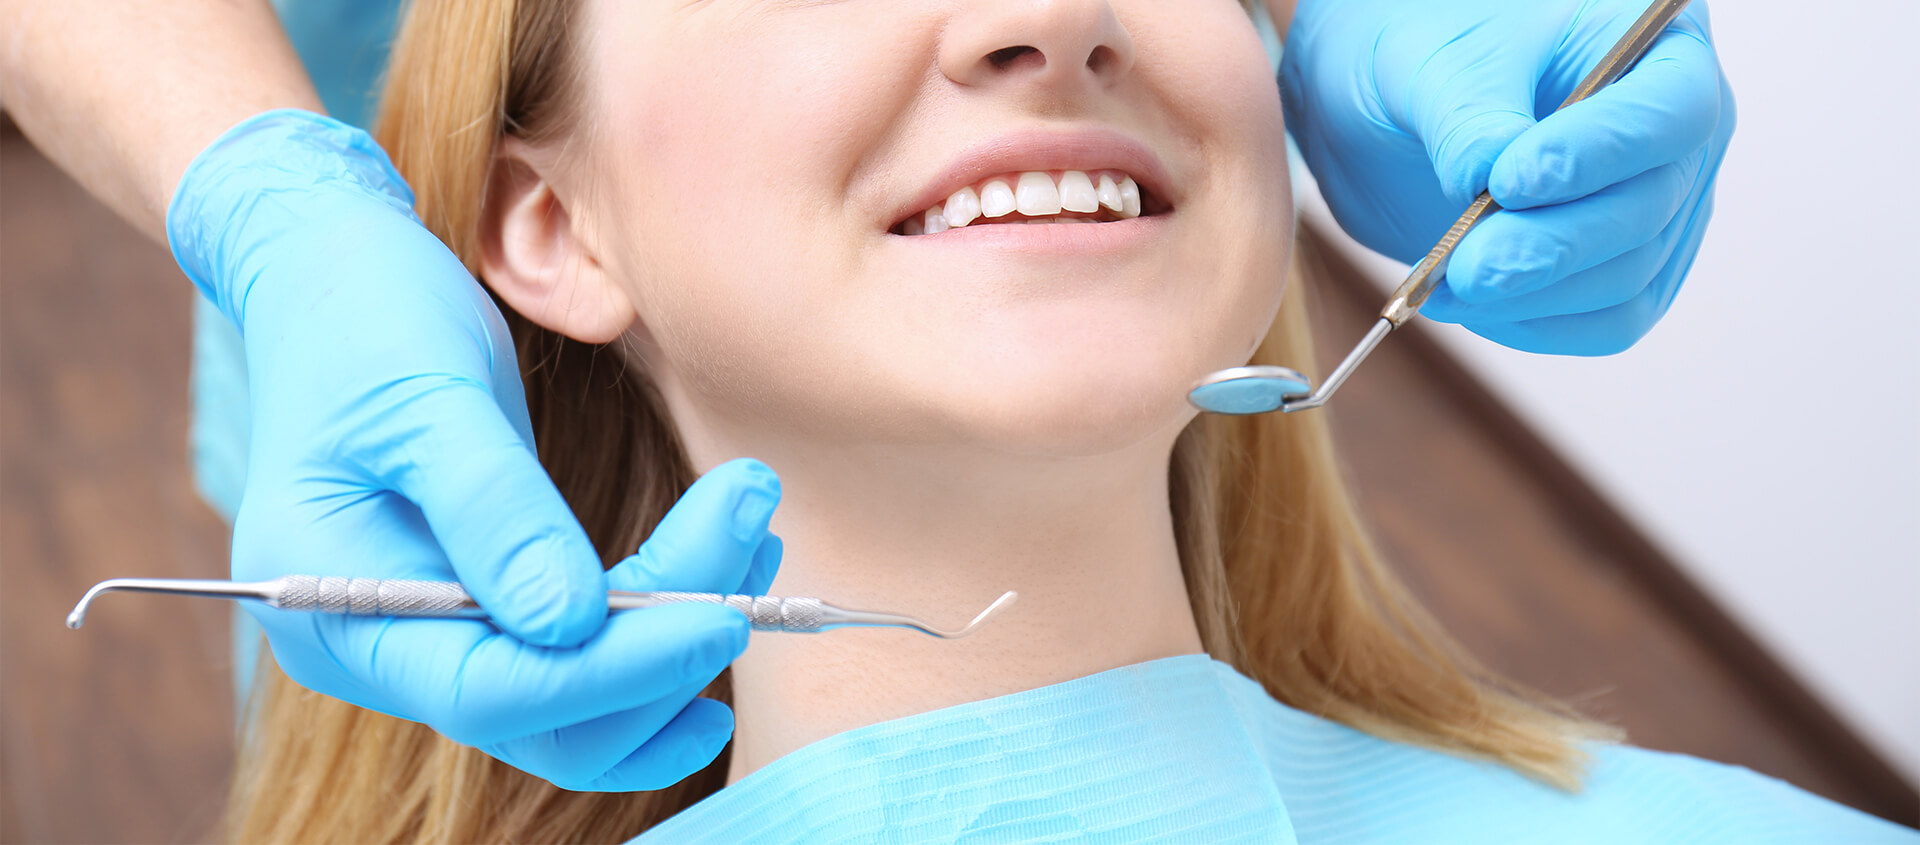 Teeth Cleaning Tartar Removal in Middletown Indiana Area